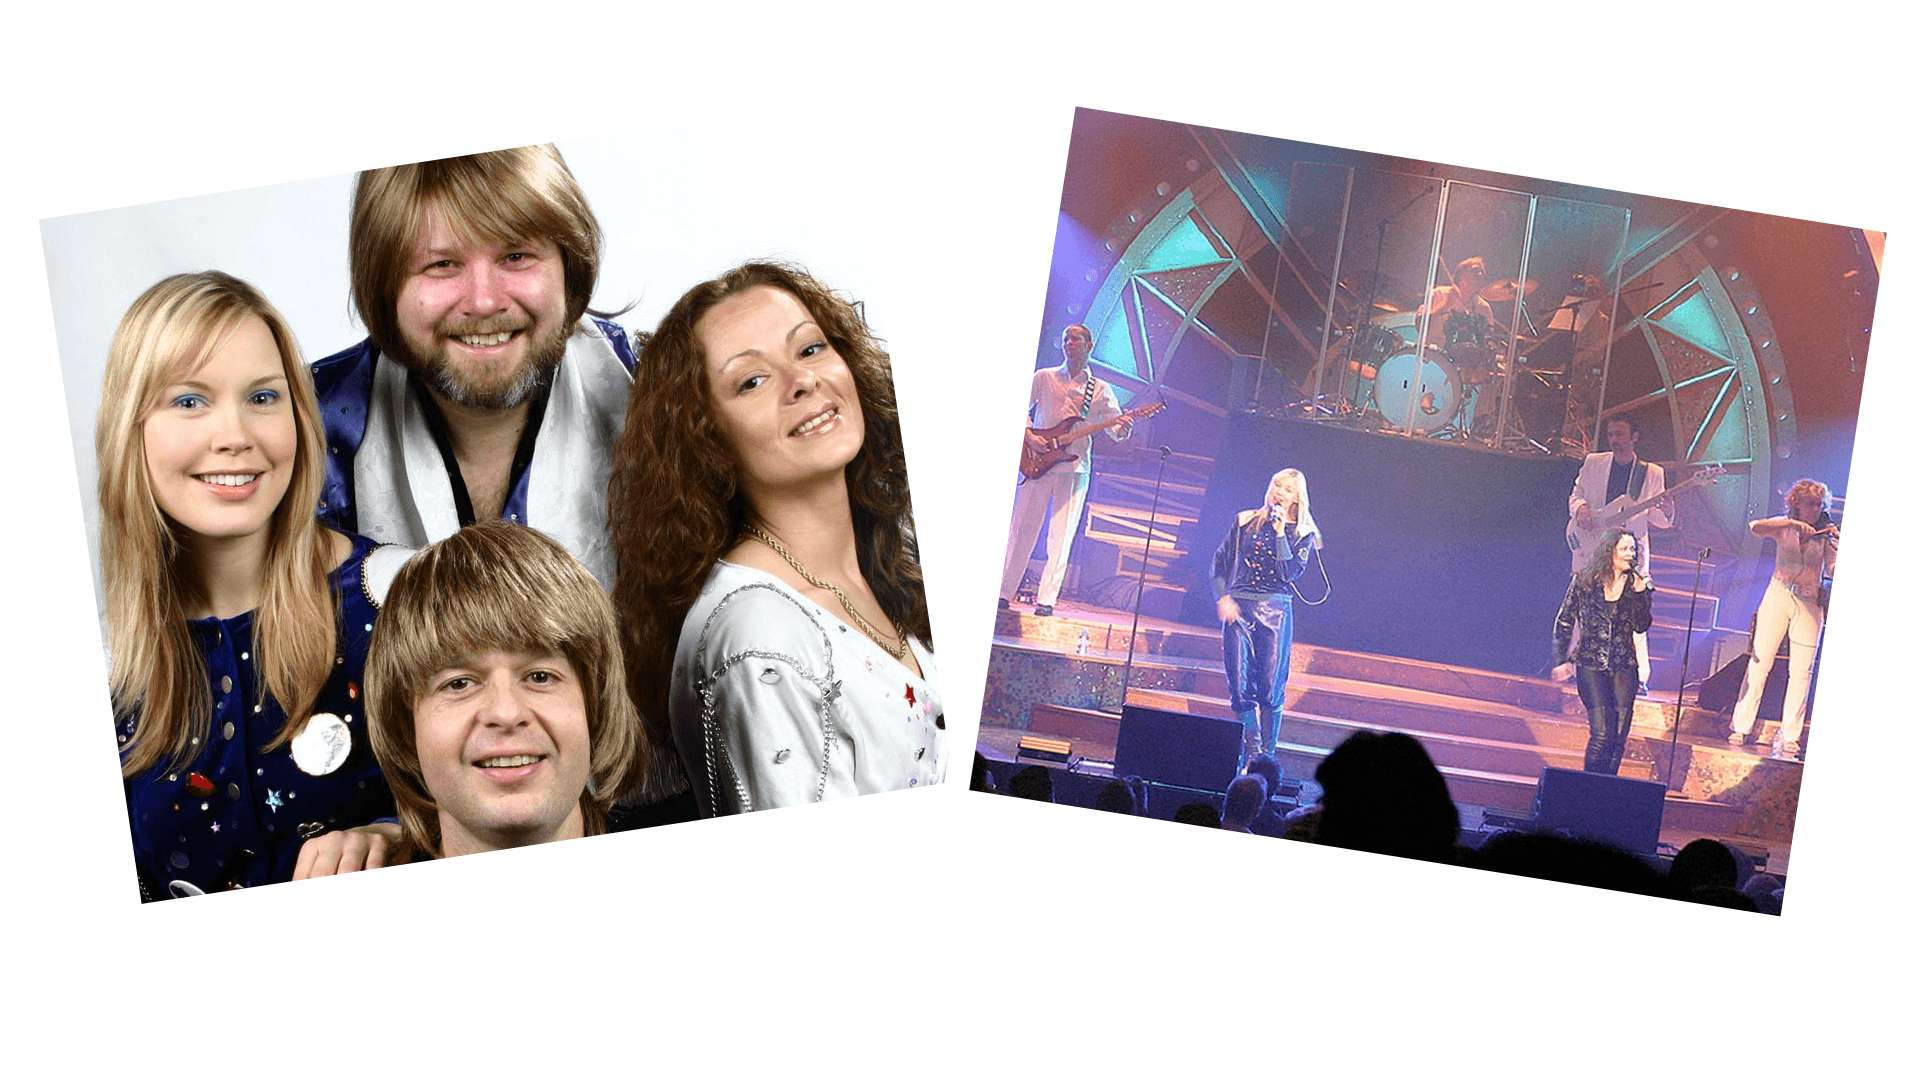 Tribute to ABBA with ABBAmania